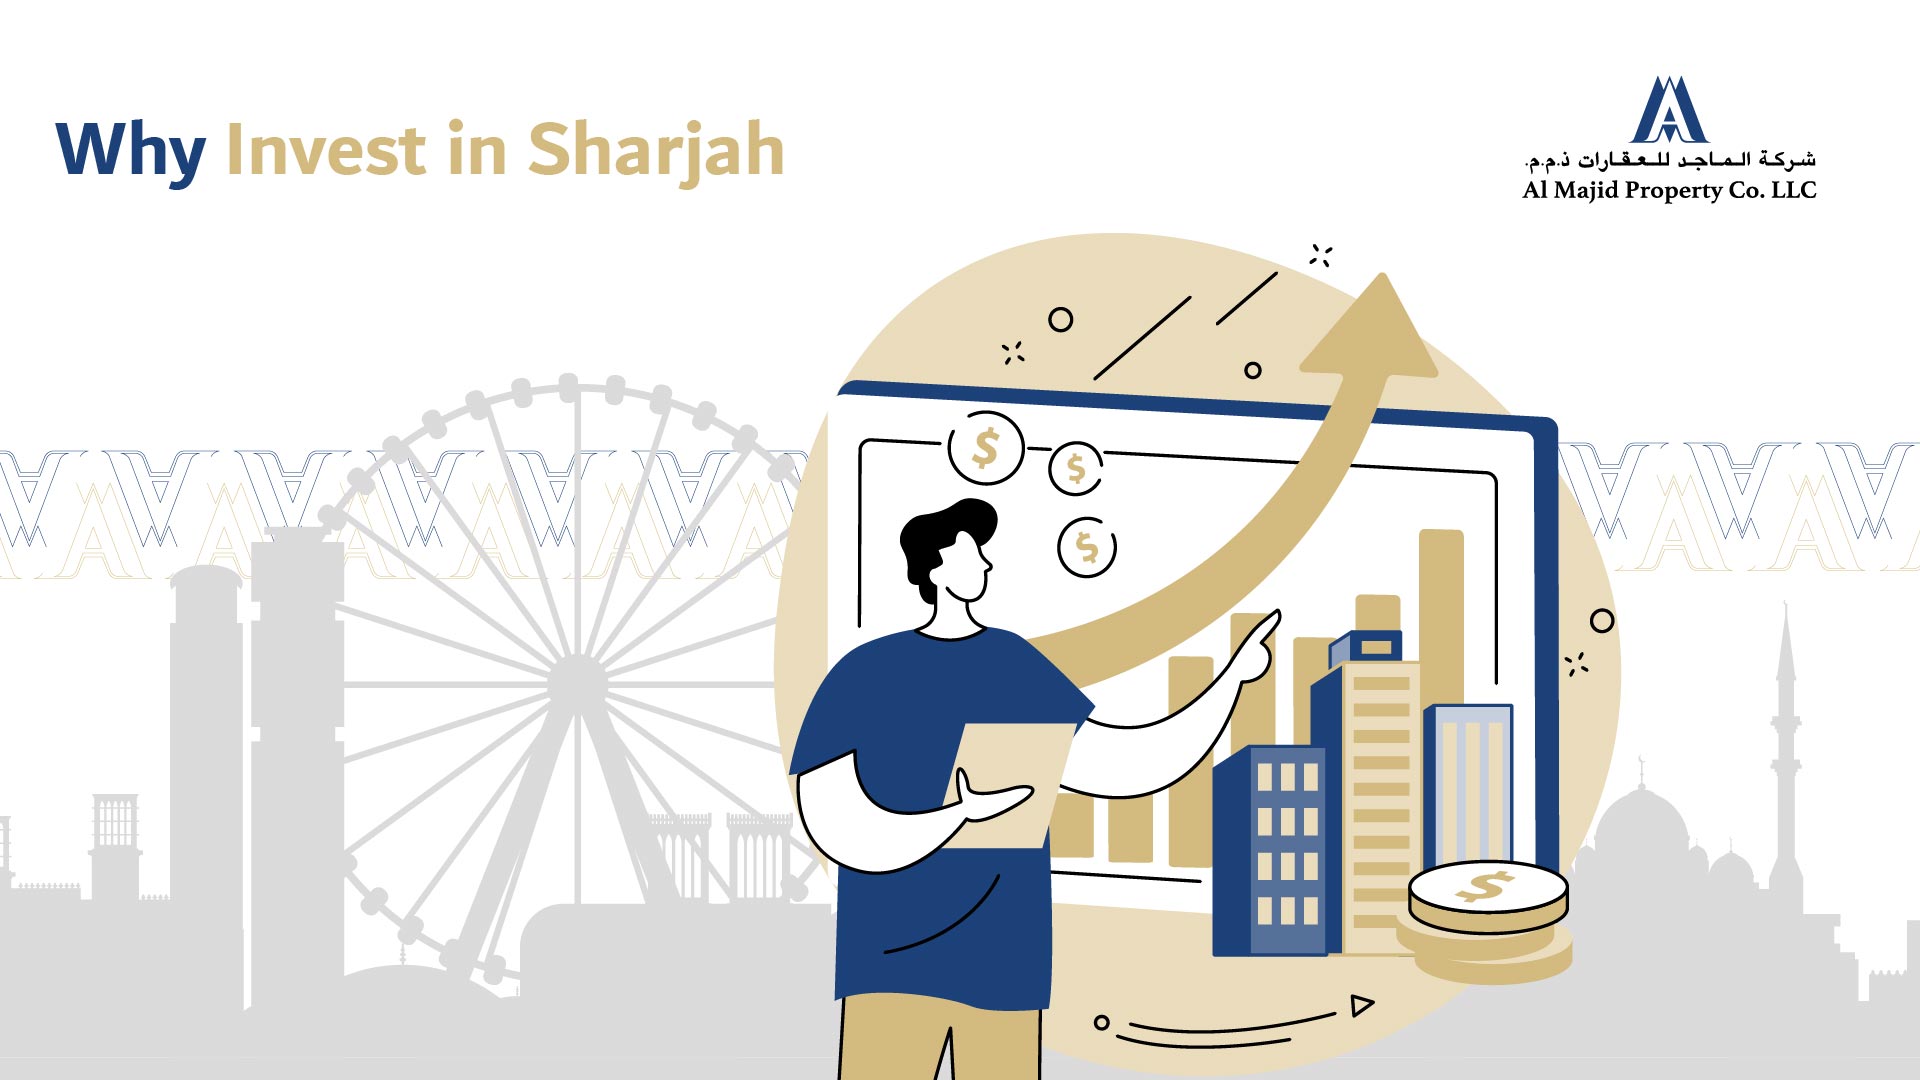 Why Invest in Sharjah